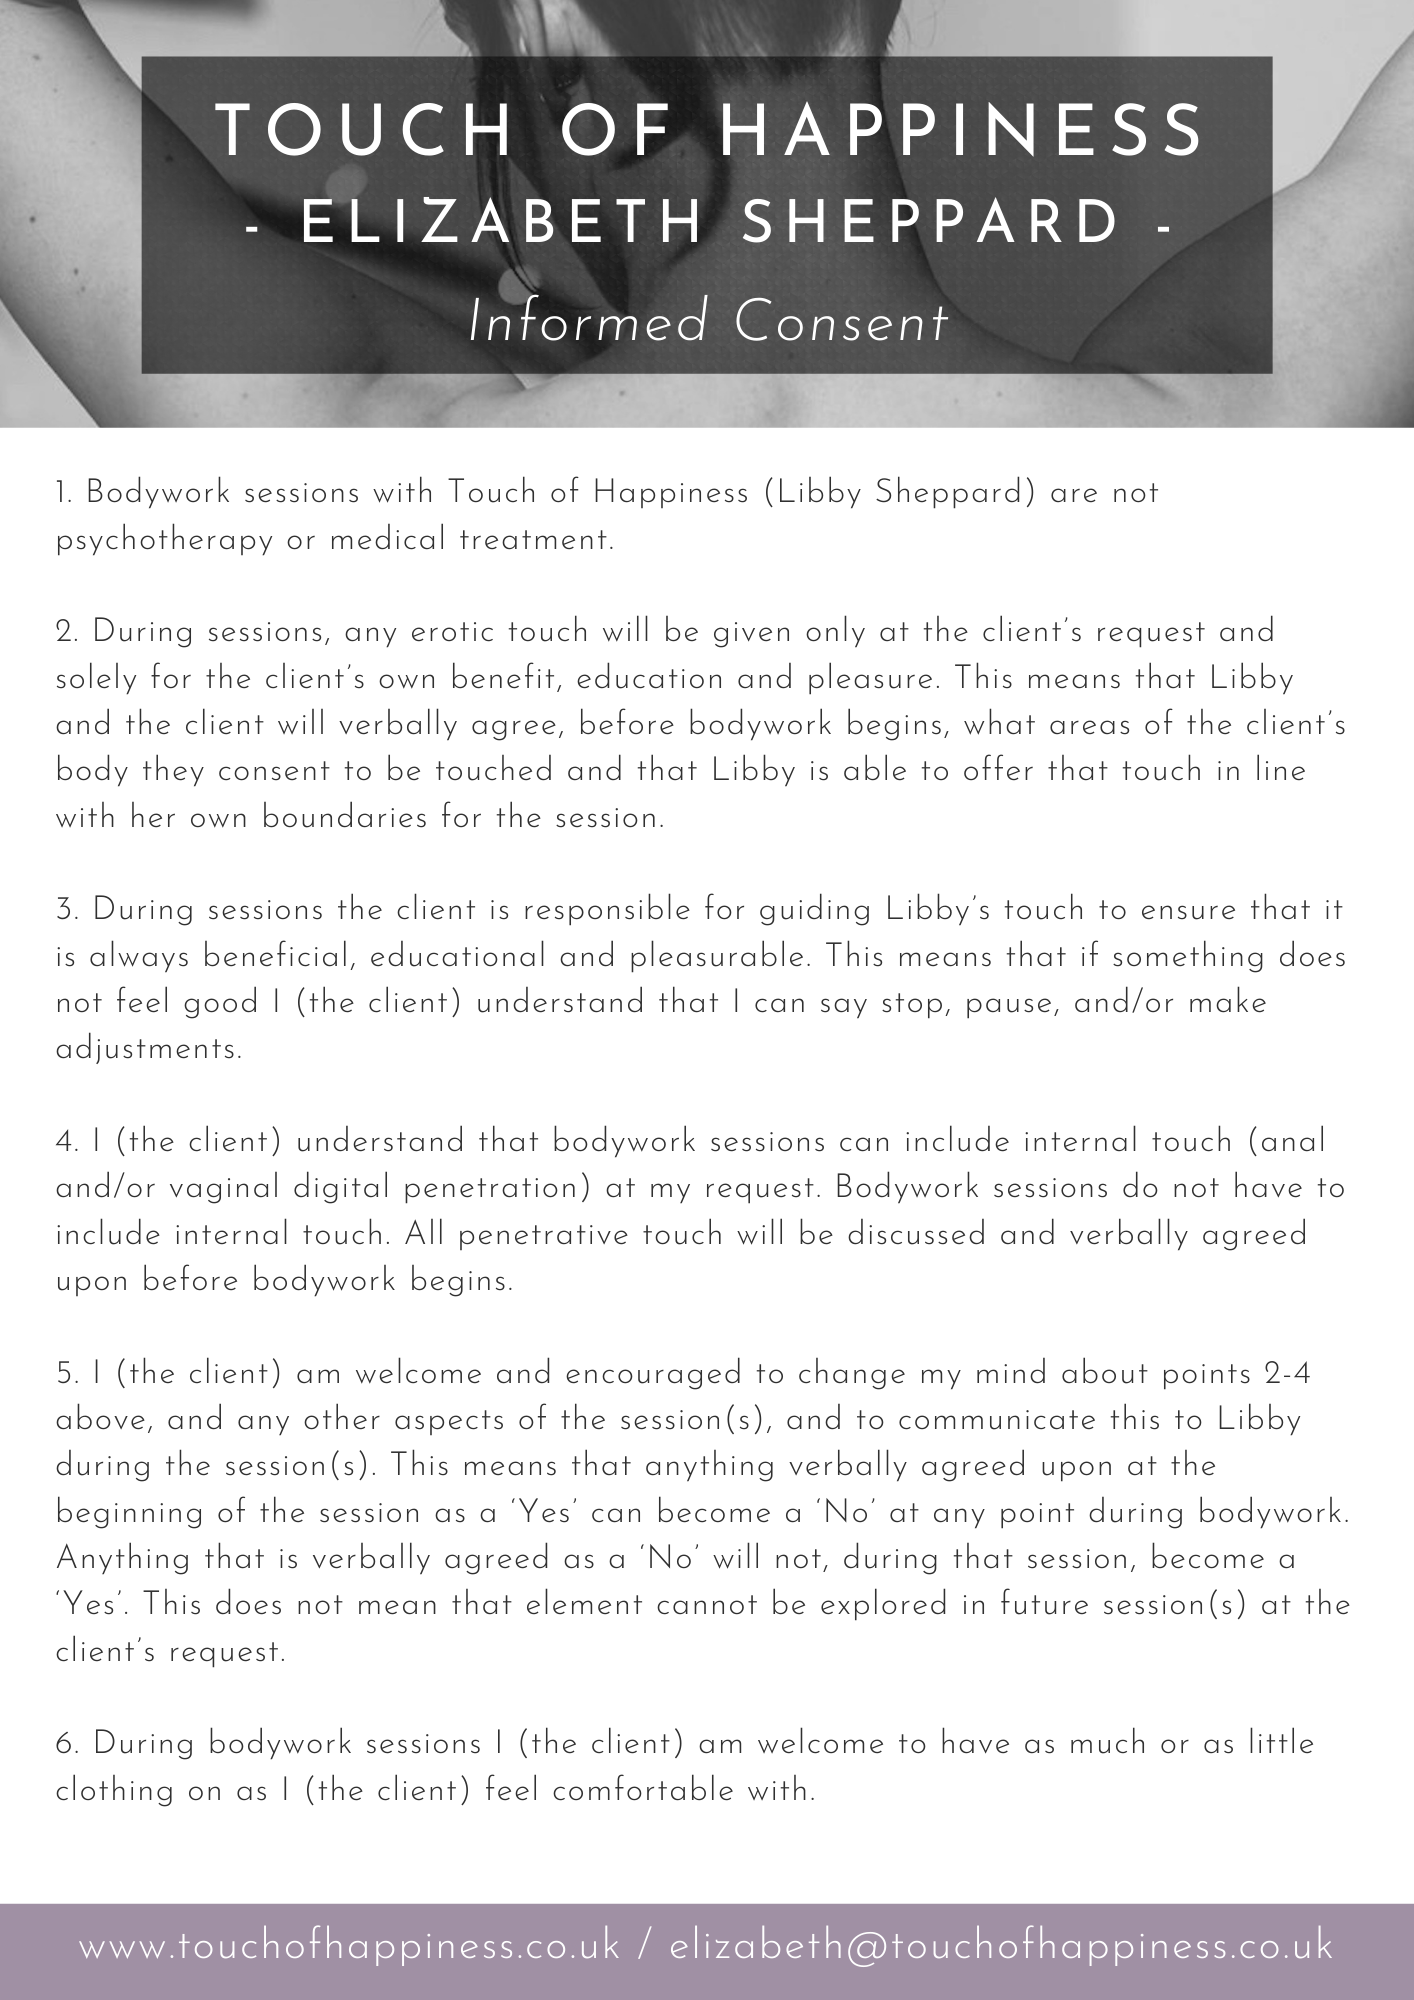 Informed Consent for Sessions